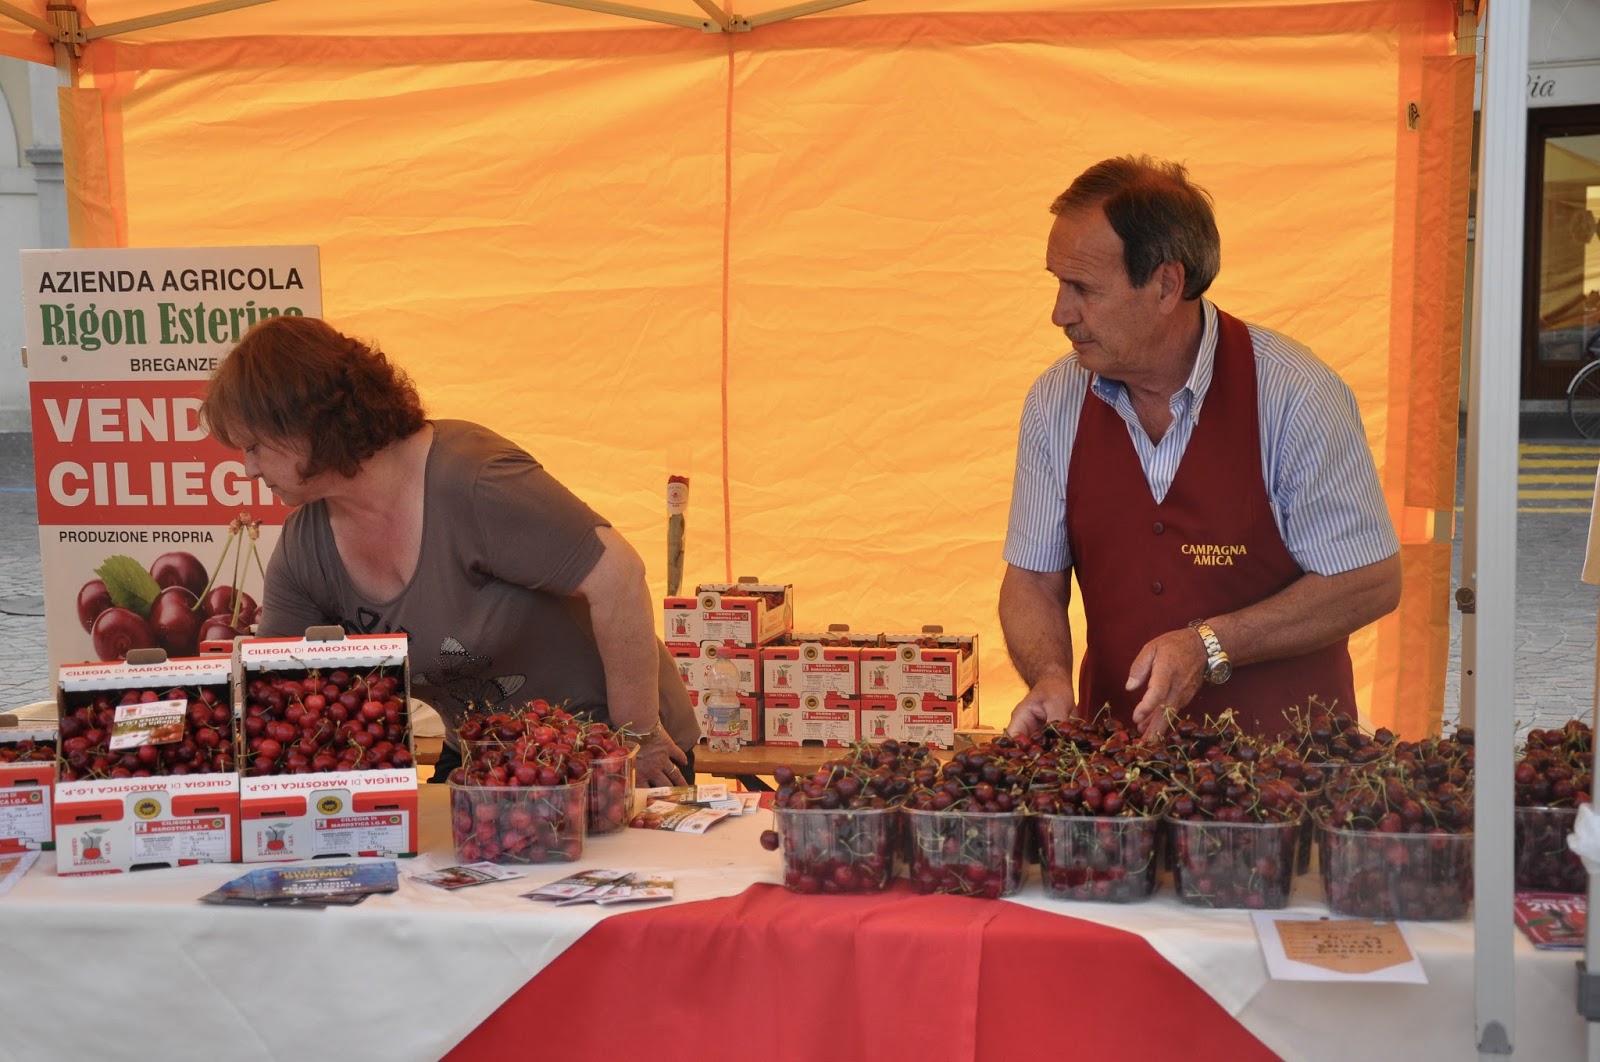 Farmers with their cherries ready for sale, Cherry Show Market, Marostica, Veneto, Italy